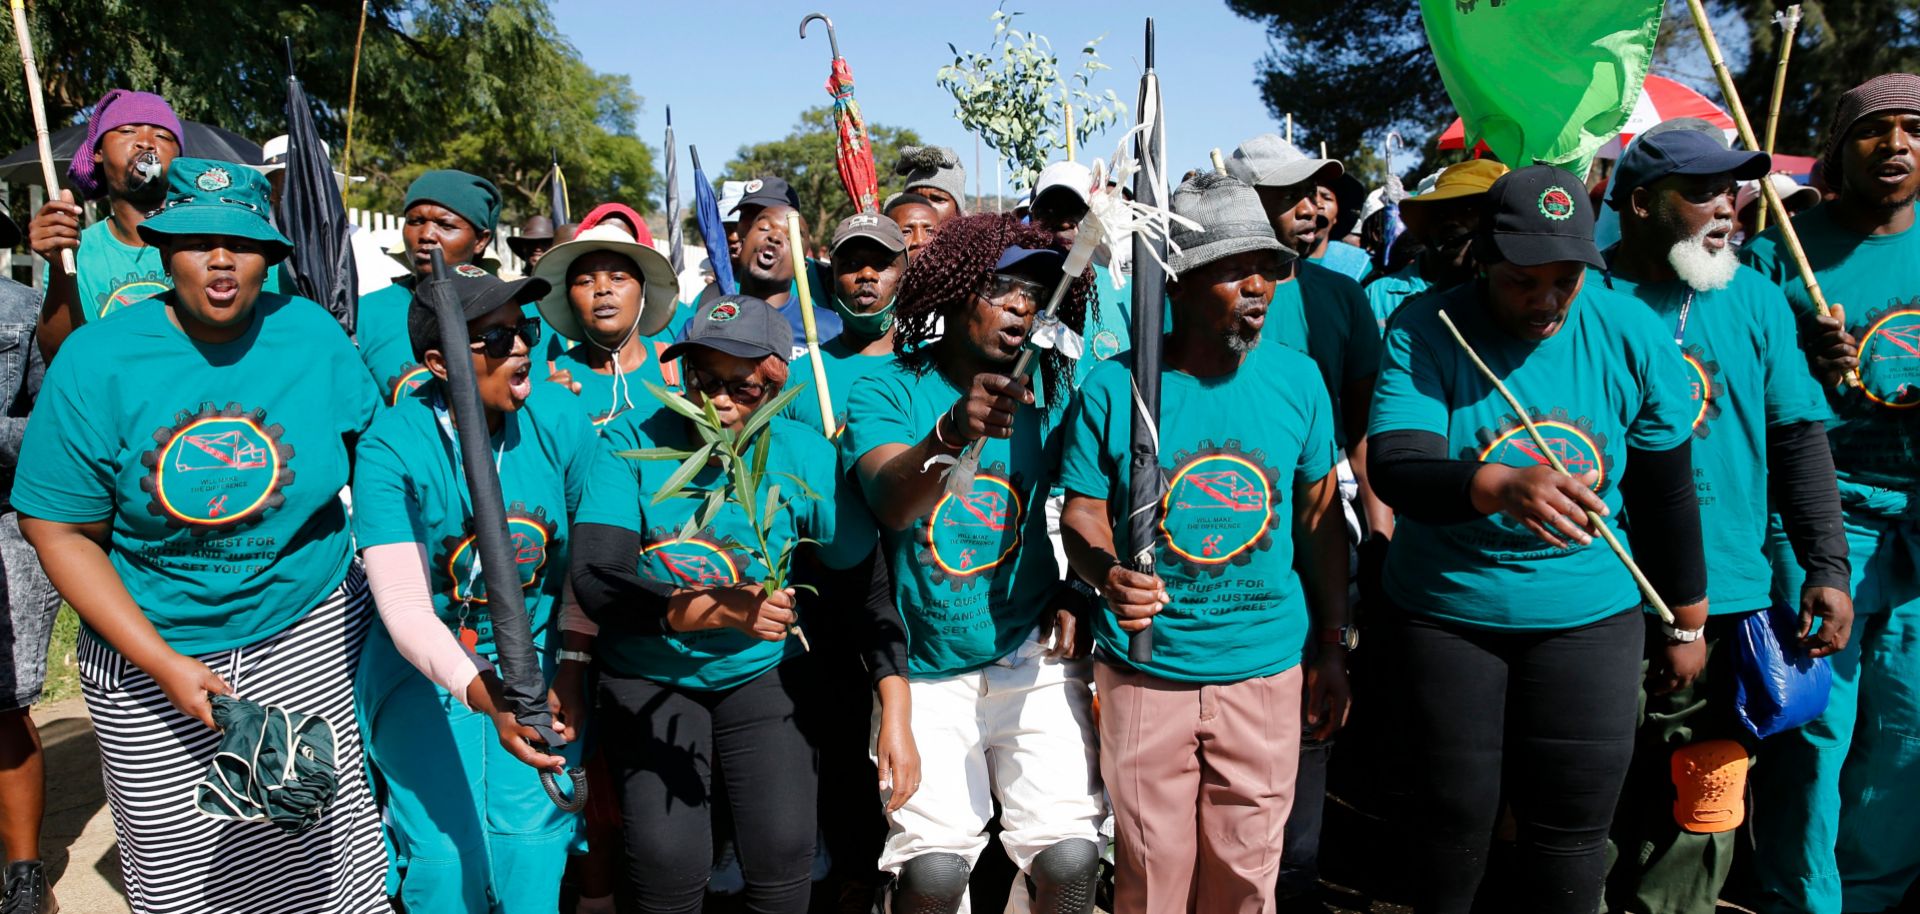 Striking workers affiliated with the Association of Mineworkers and Construction Union (AMCU) sing outside of Sibanye-Stillwater's Driefontein gold mine near Carletonville, South Africa, on May 6, 2022.